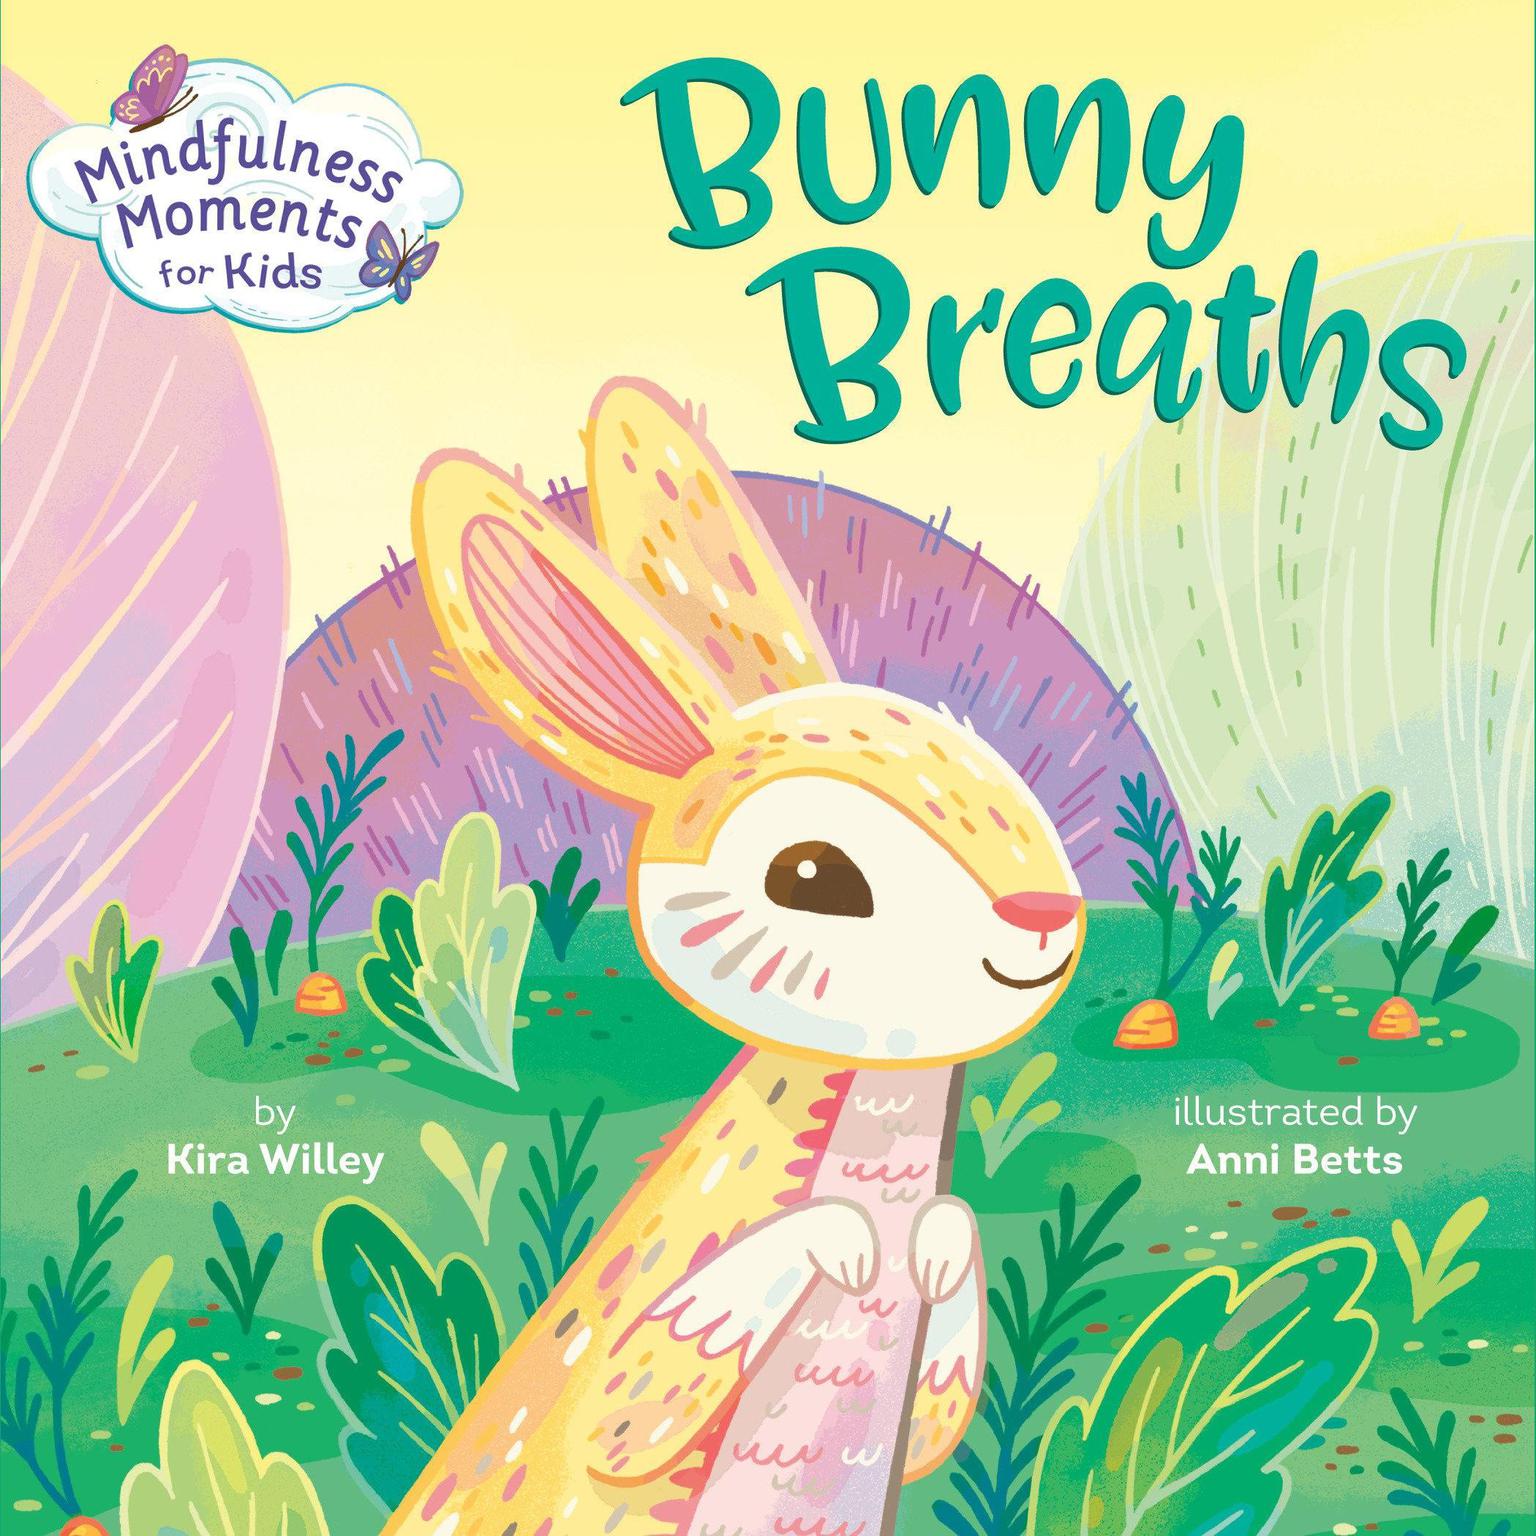 Mindfulness Moments for Kids: Bunny Breaths Audiobook, by Kira Willey